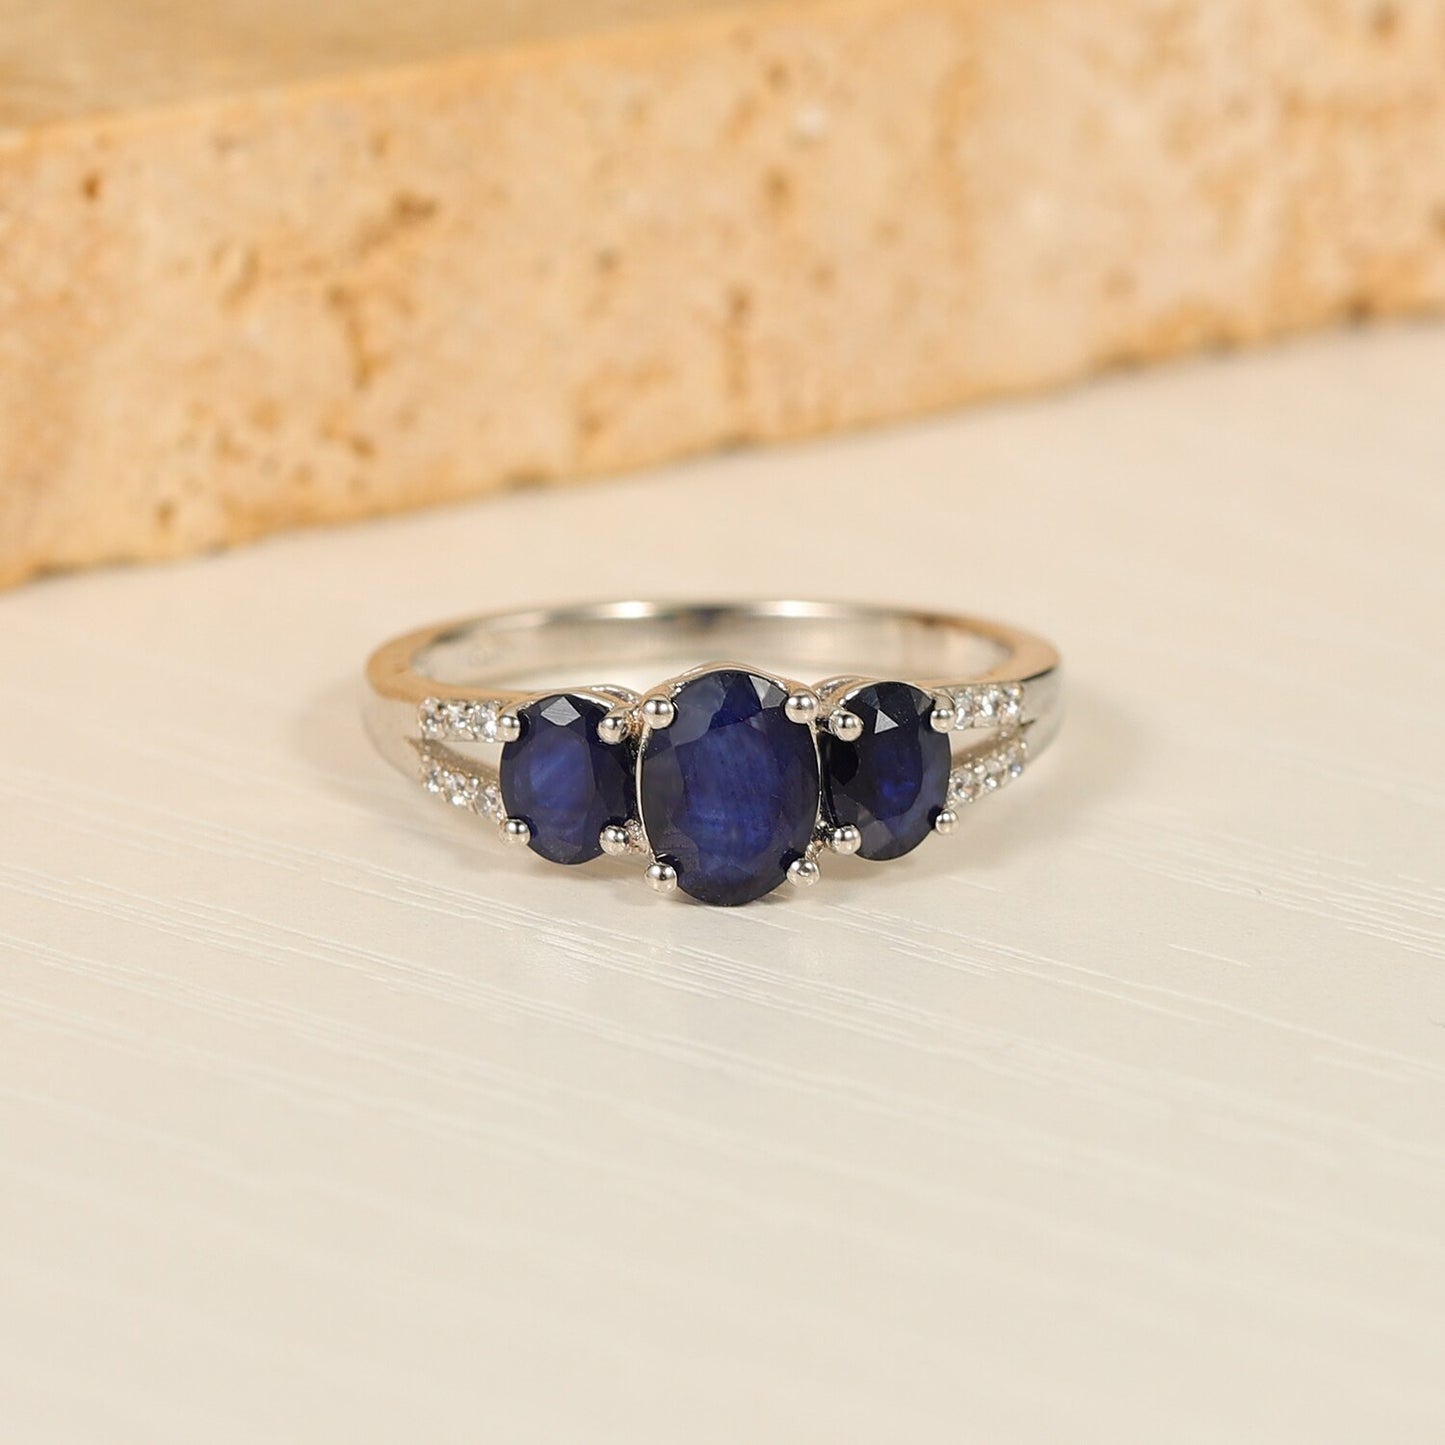 GEM&#39;S BALLET Sapphire Gemstone Rings Natural Blue Sapphire Three Stone Engagement Rings in 925 Sterling Silver Gift For Her Blue Sapphire|925 Sterling Silver